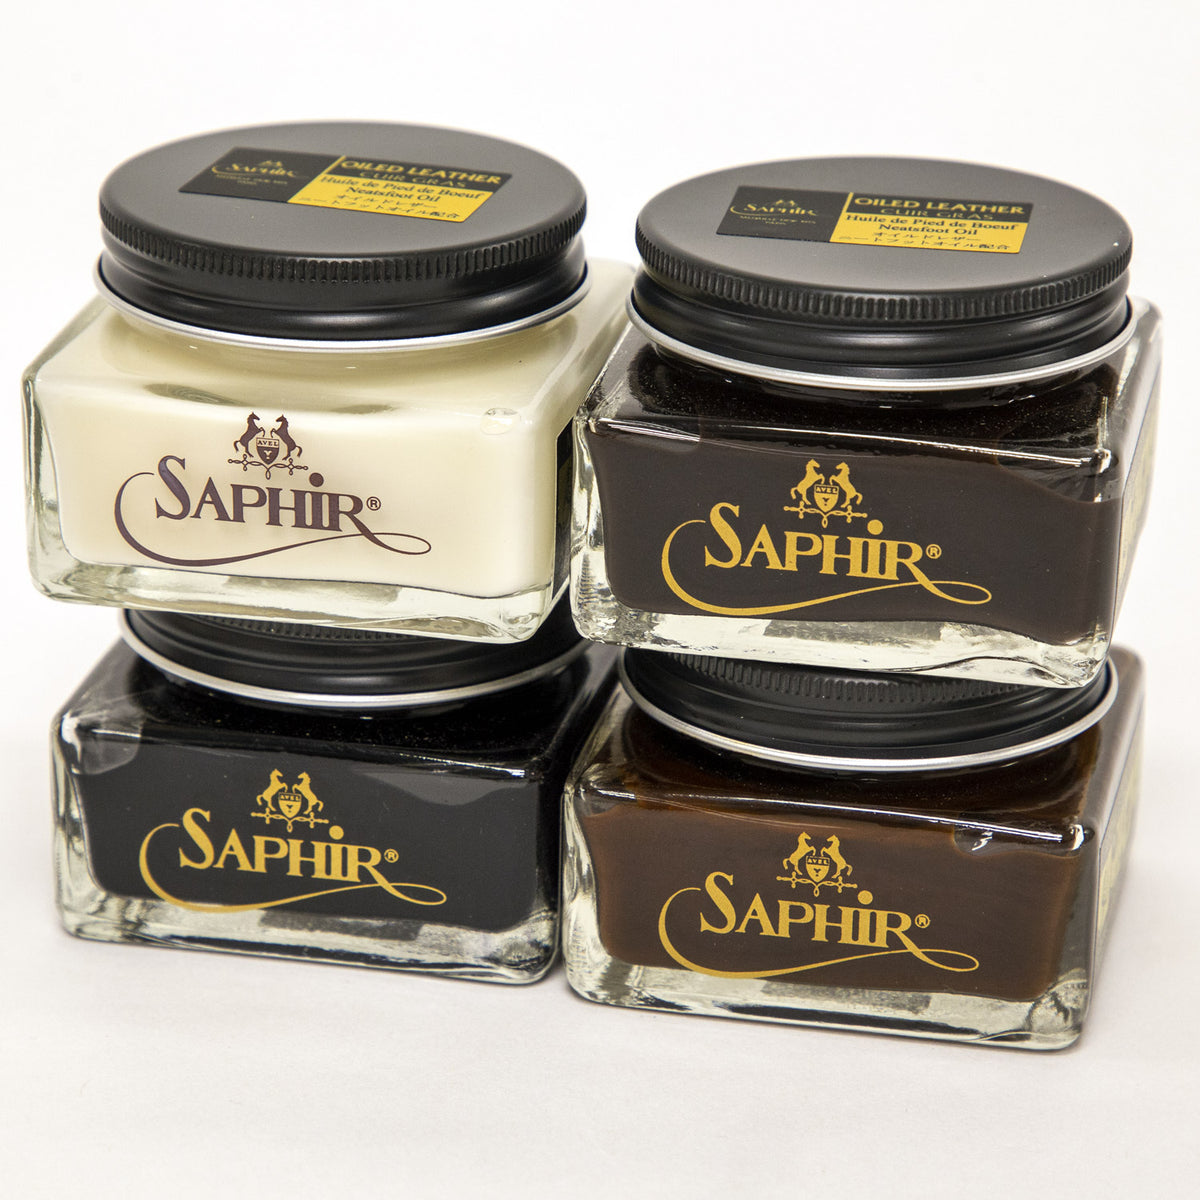 Special Reptile Beauty Milk - Saphir Medaille D'OR - Exotic Shoe Care